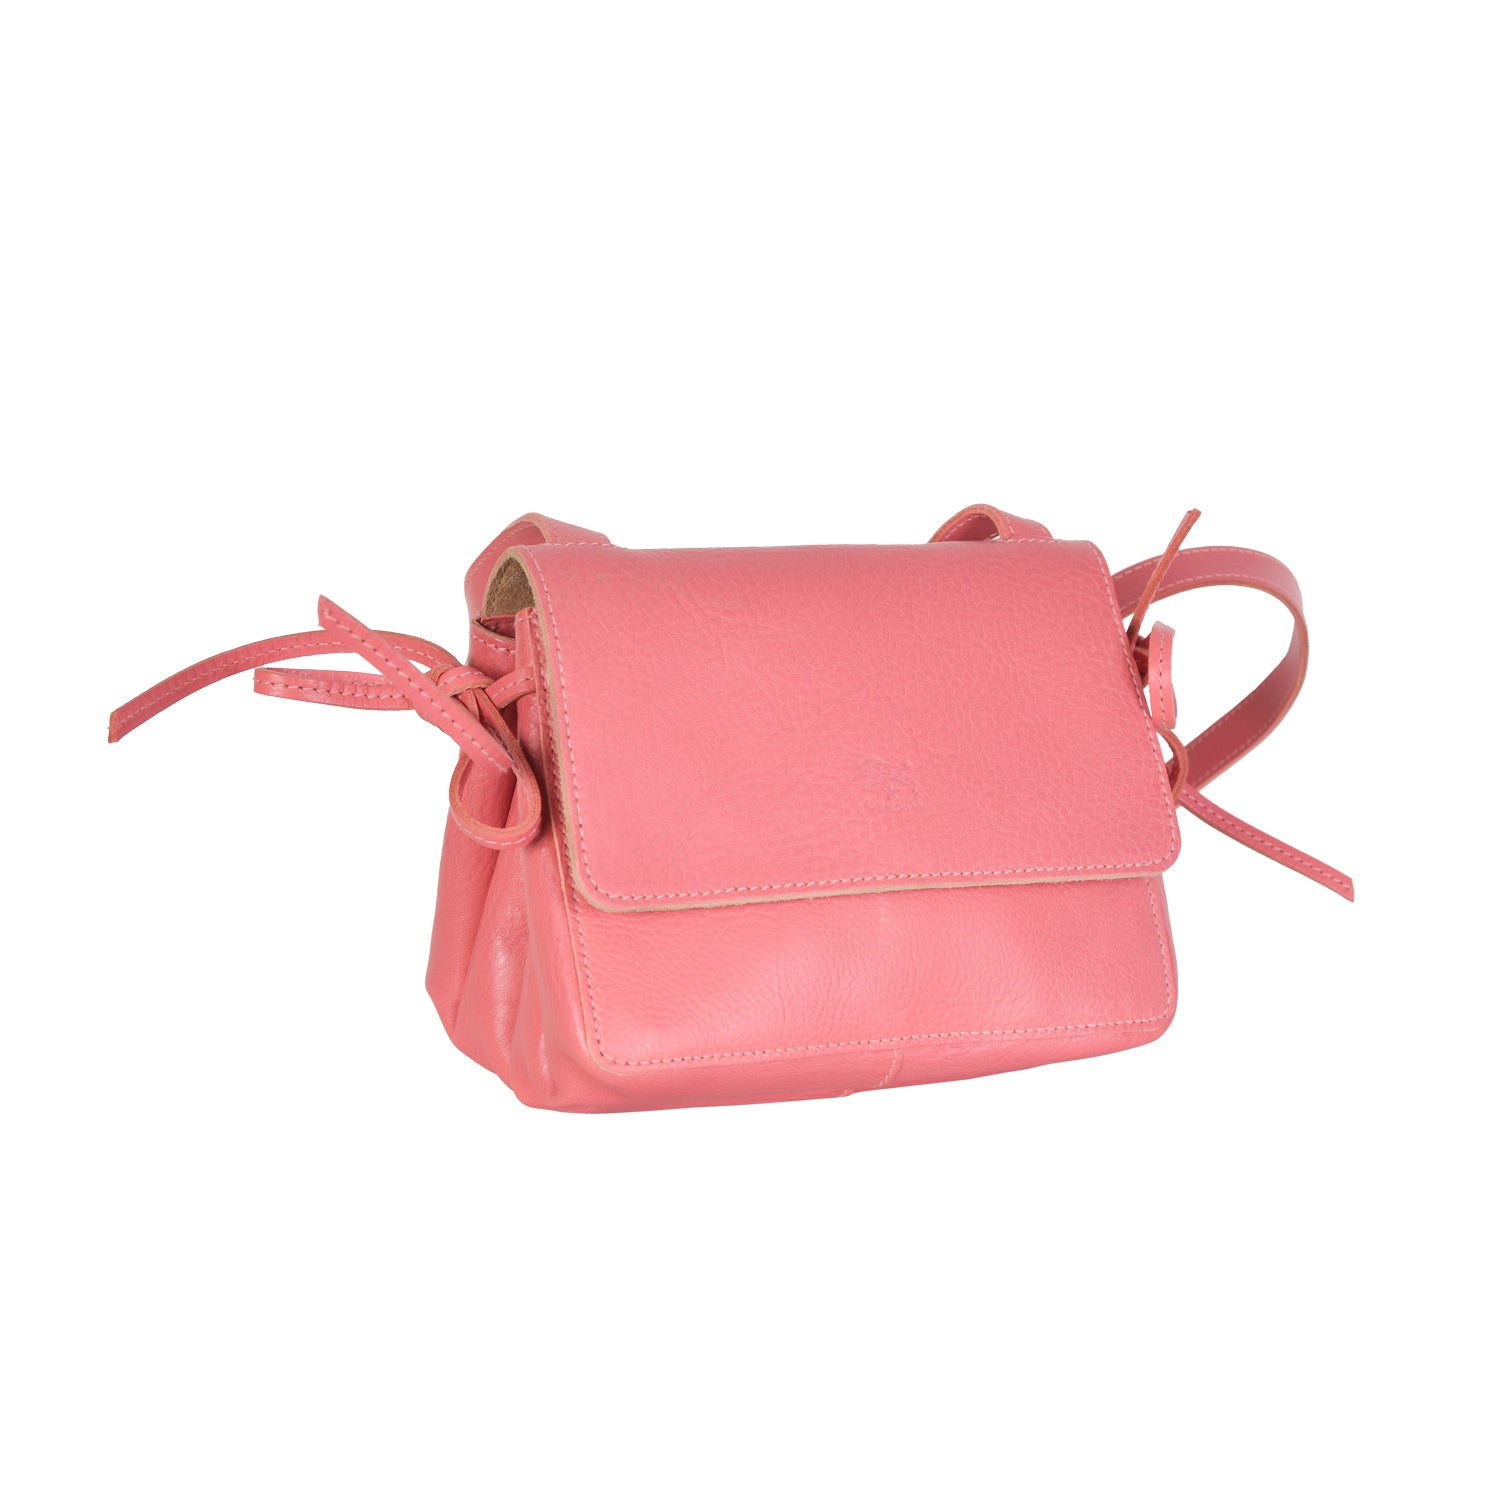 NEW IL BISONTE WOMEN'S SOFFIETTO COLLECTION CROSSBODY BAG IN PINK LEATHER